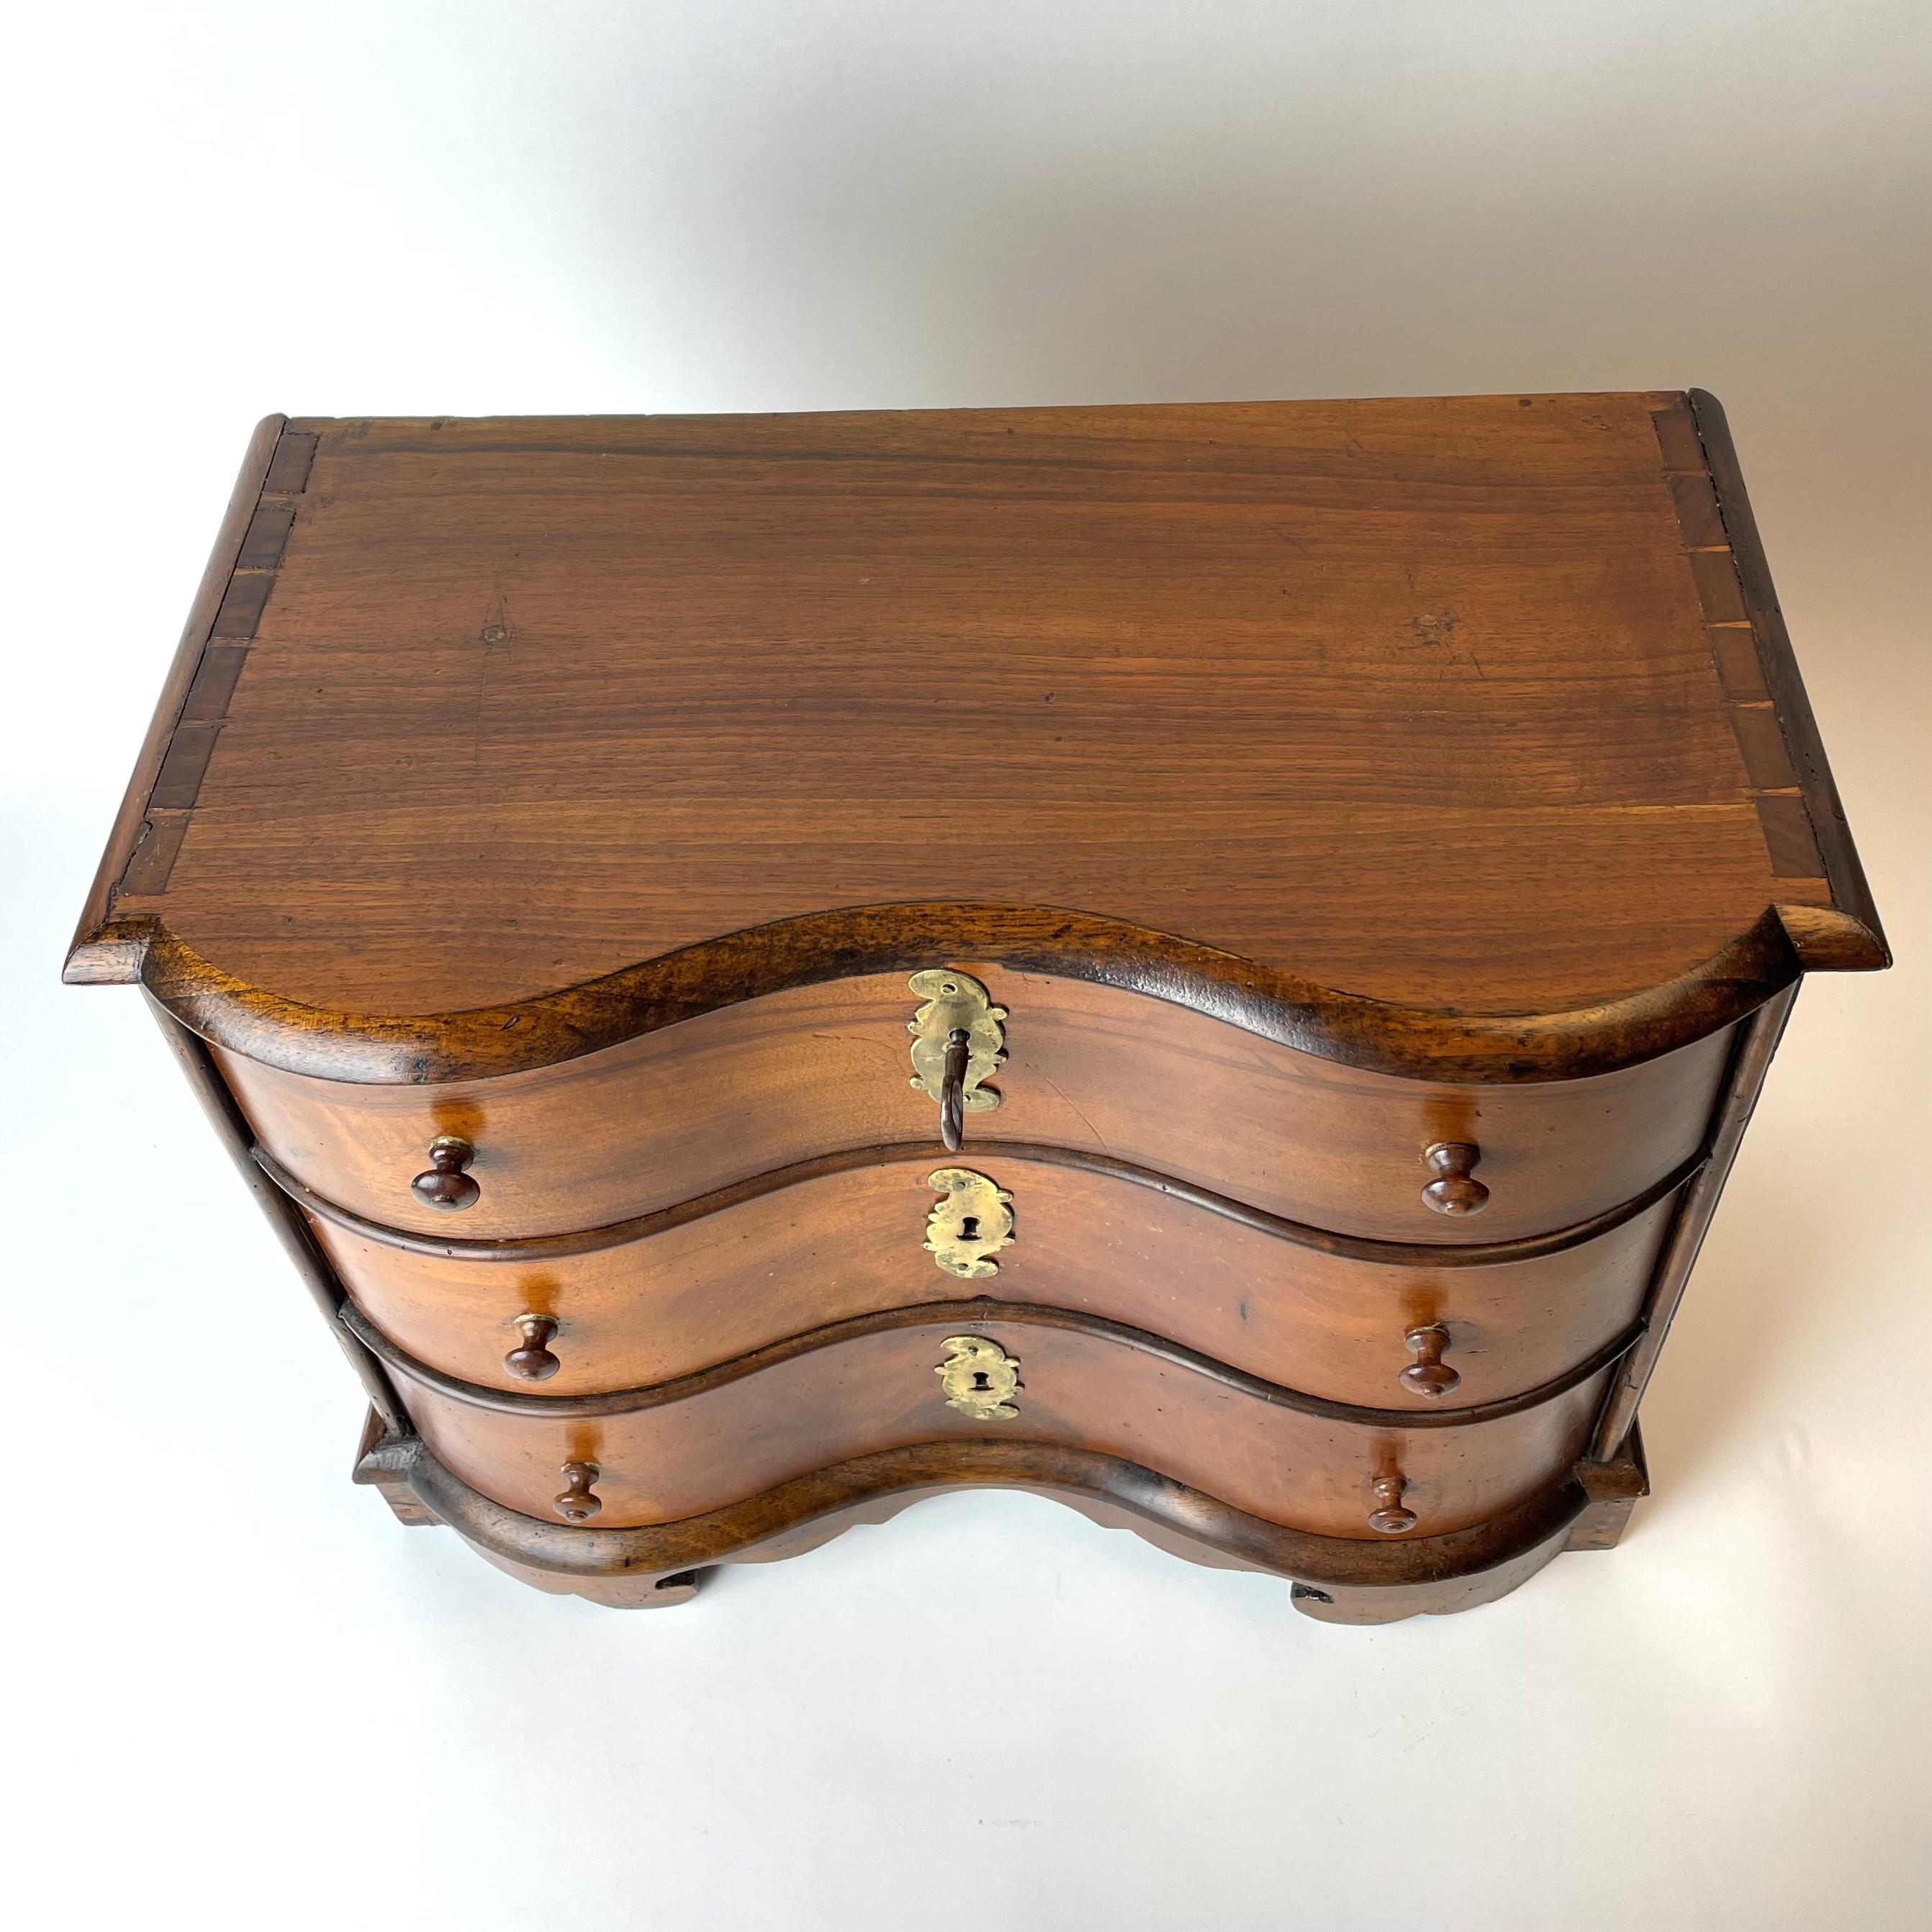 European Rare and Beautiful Miniature Chest of Drawers from the Early 18th Century For Sale